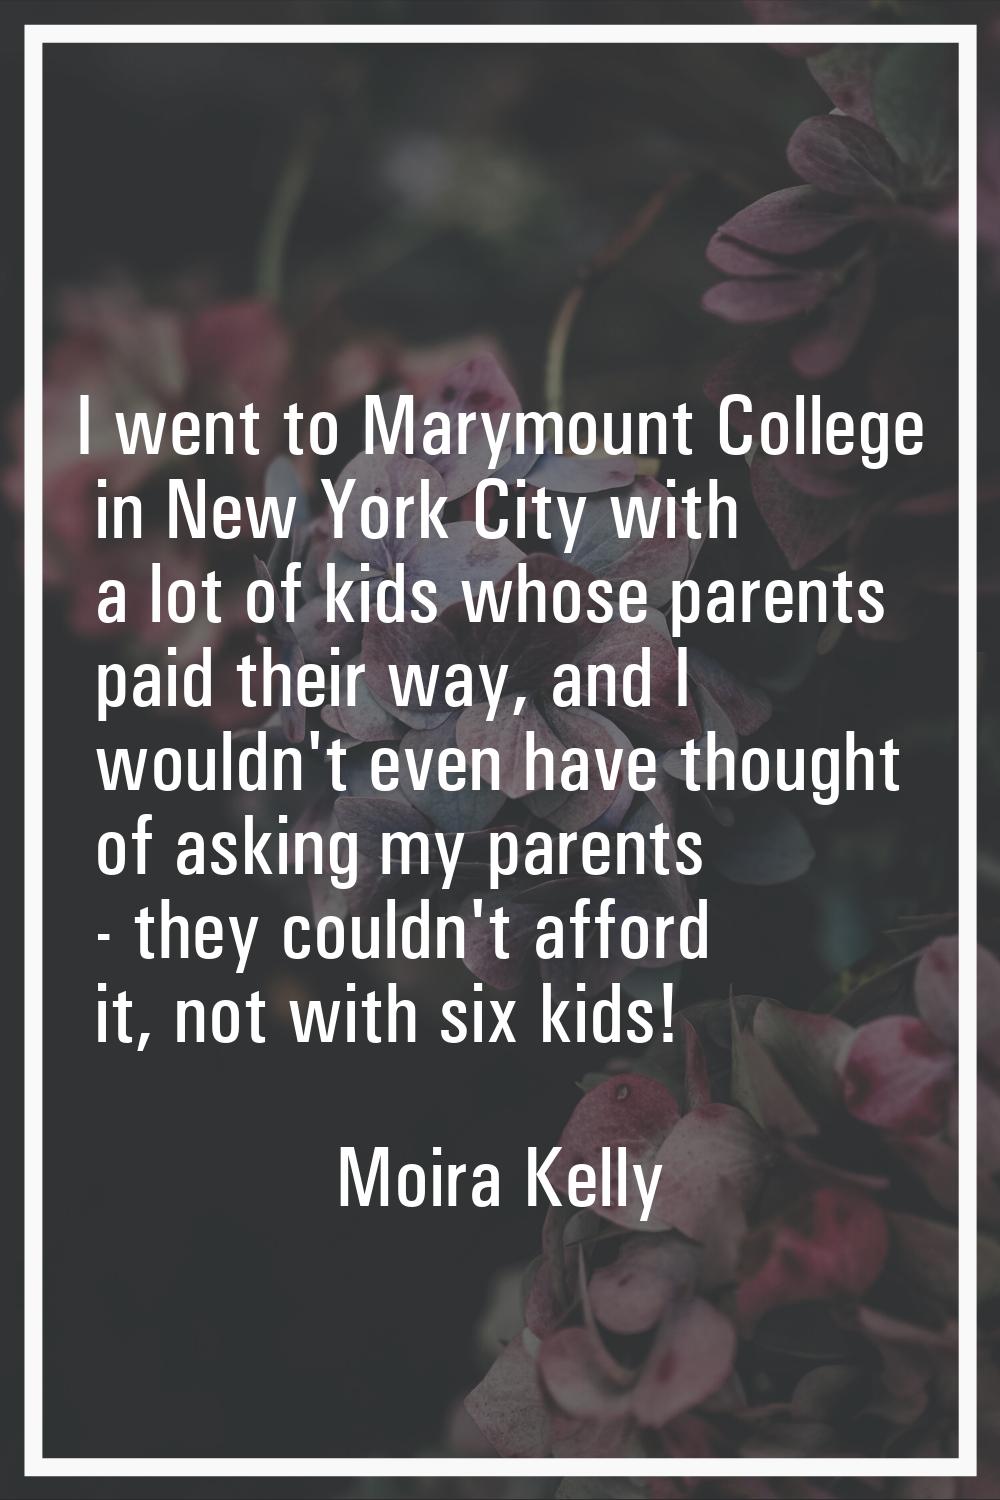 I went to Marymount College in New York City with a lot of kids whose parents paid their way, and I